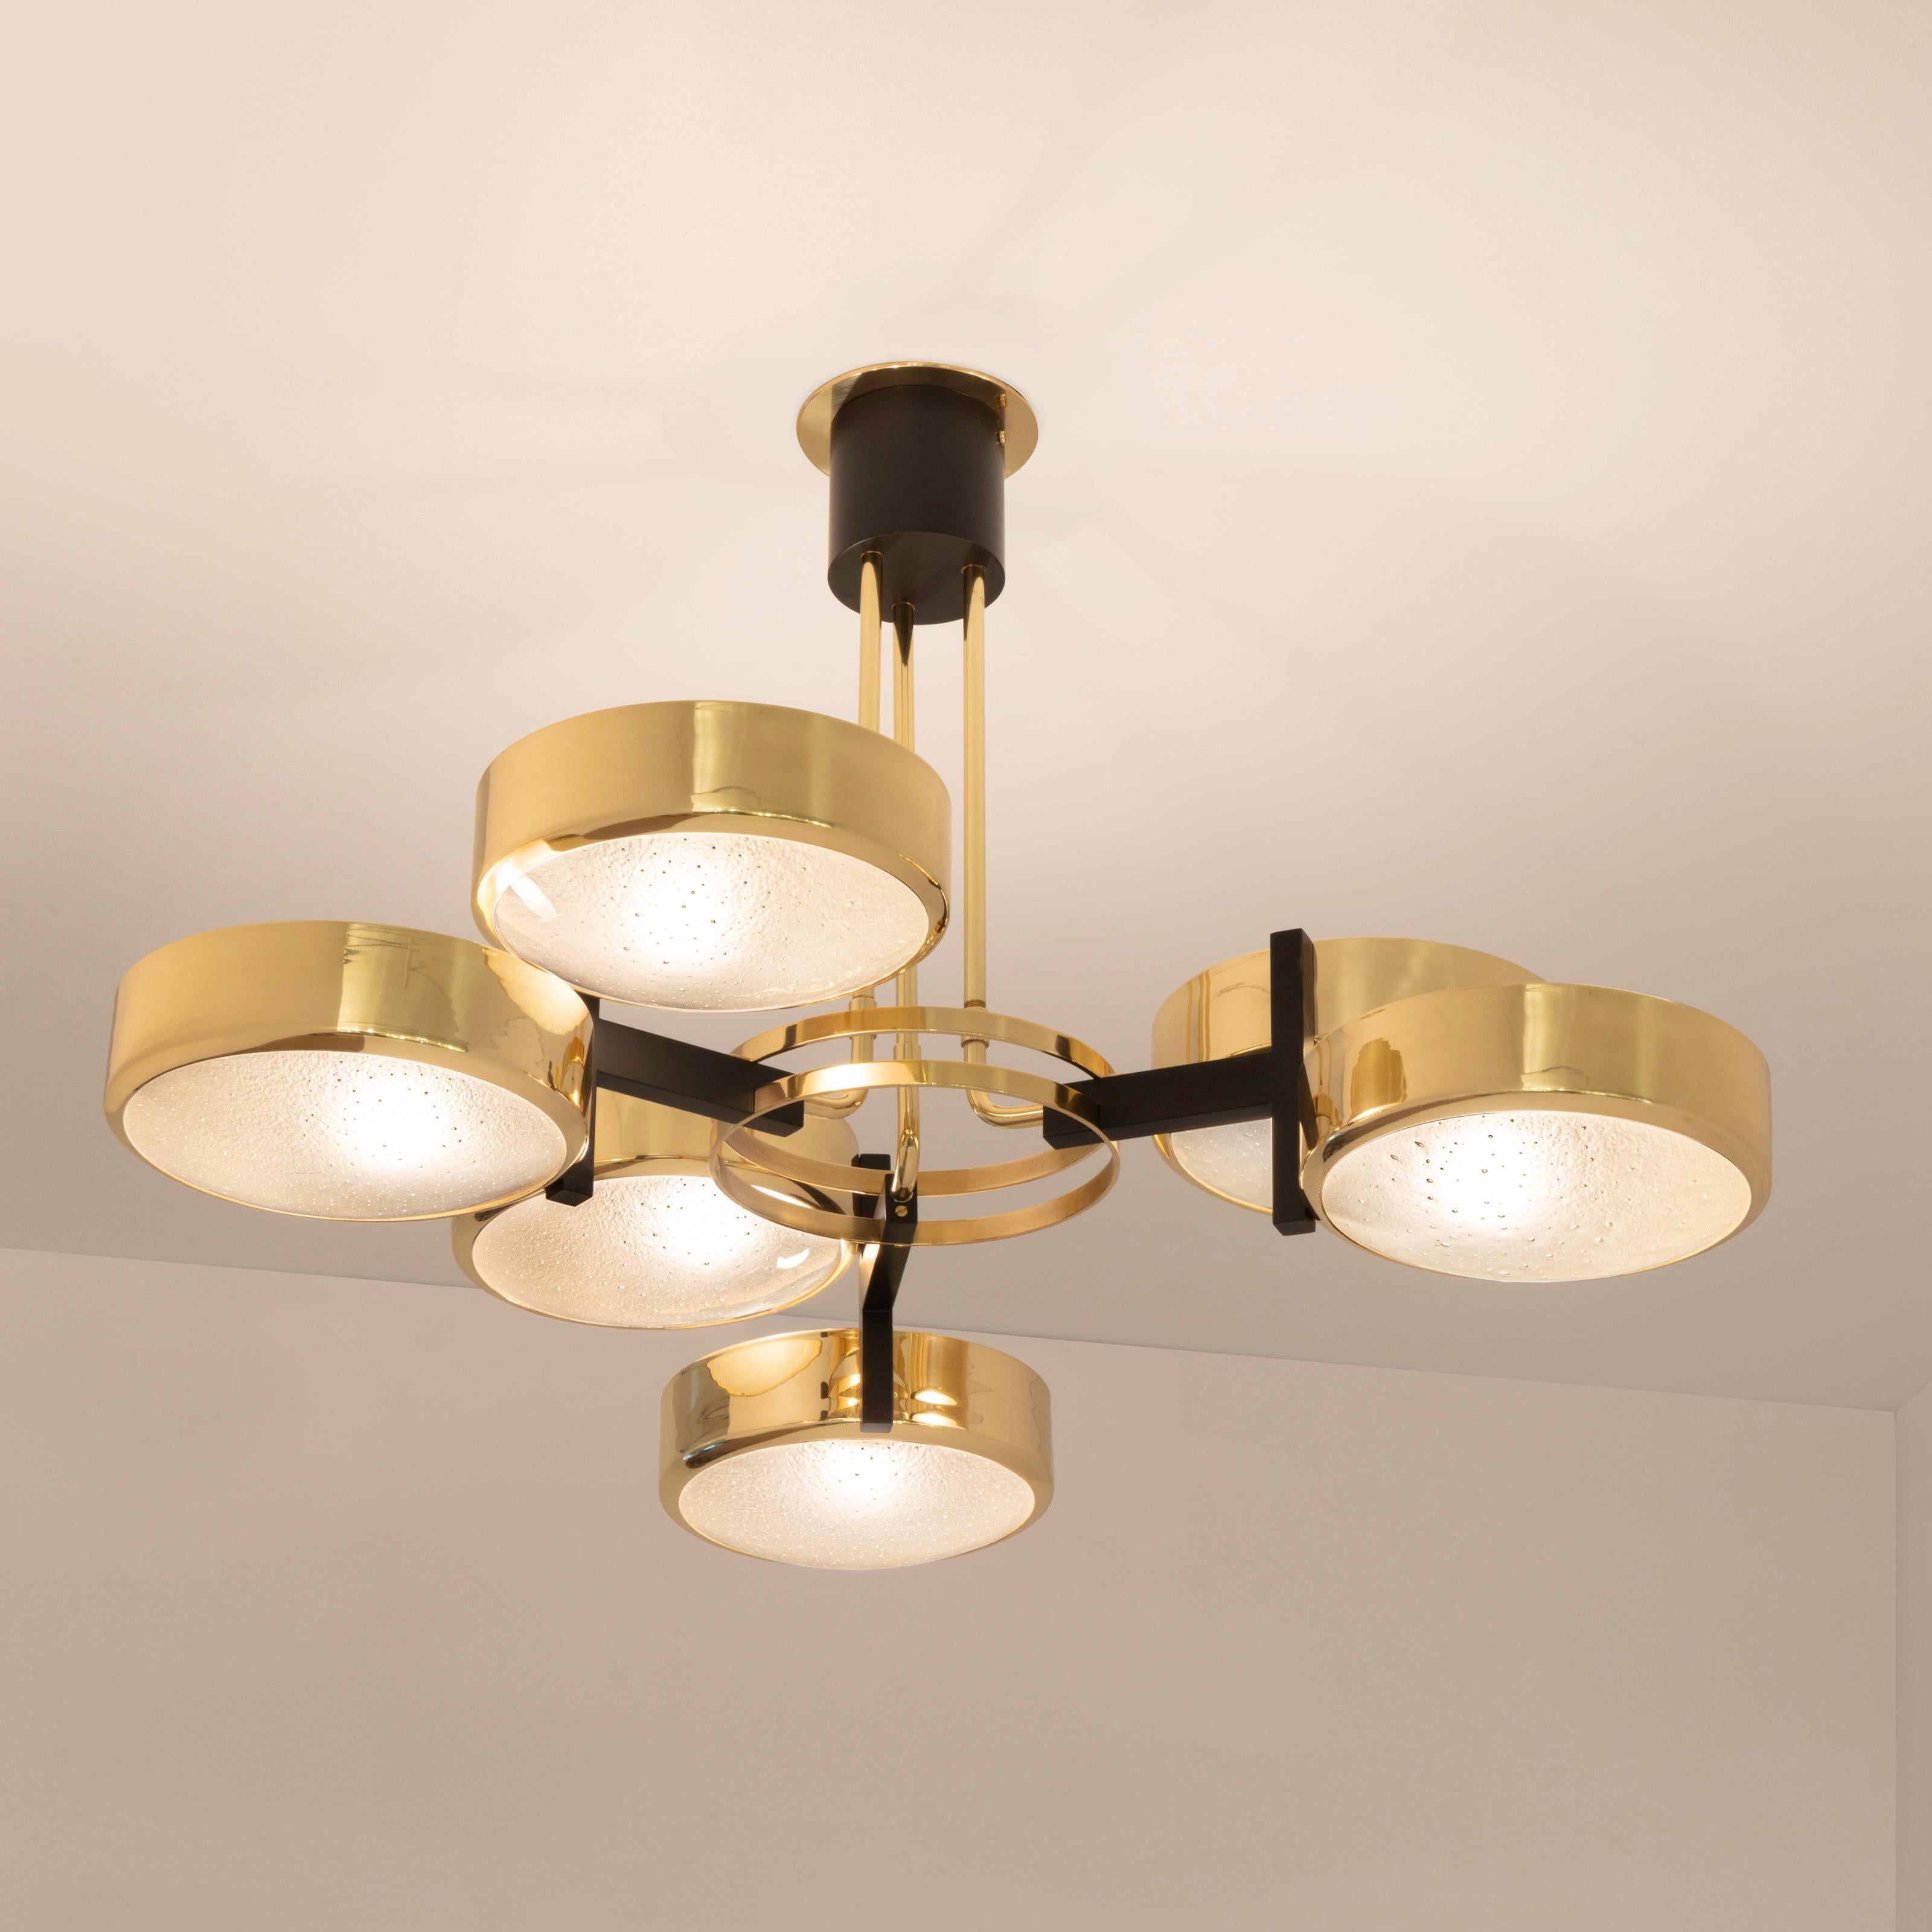 The Eclissi ceiling light is designed around three pairs of eclipsing shades bound by a series of brass rings and a distinctive triple stem. The first images show the fixture in our polished brass finish with black accents-subsequent pictures show